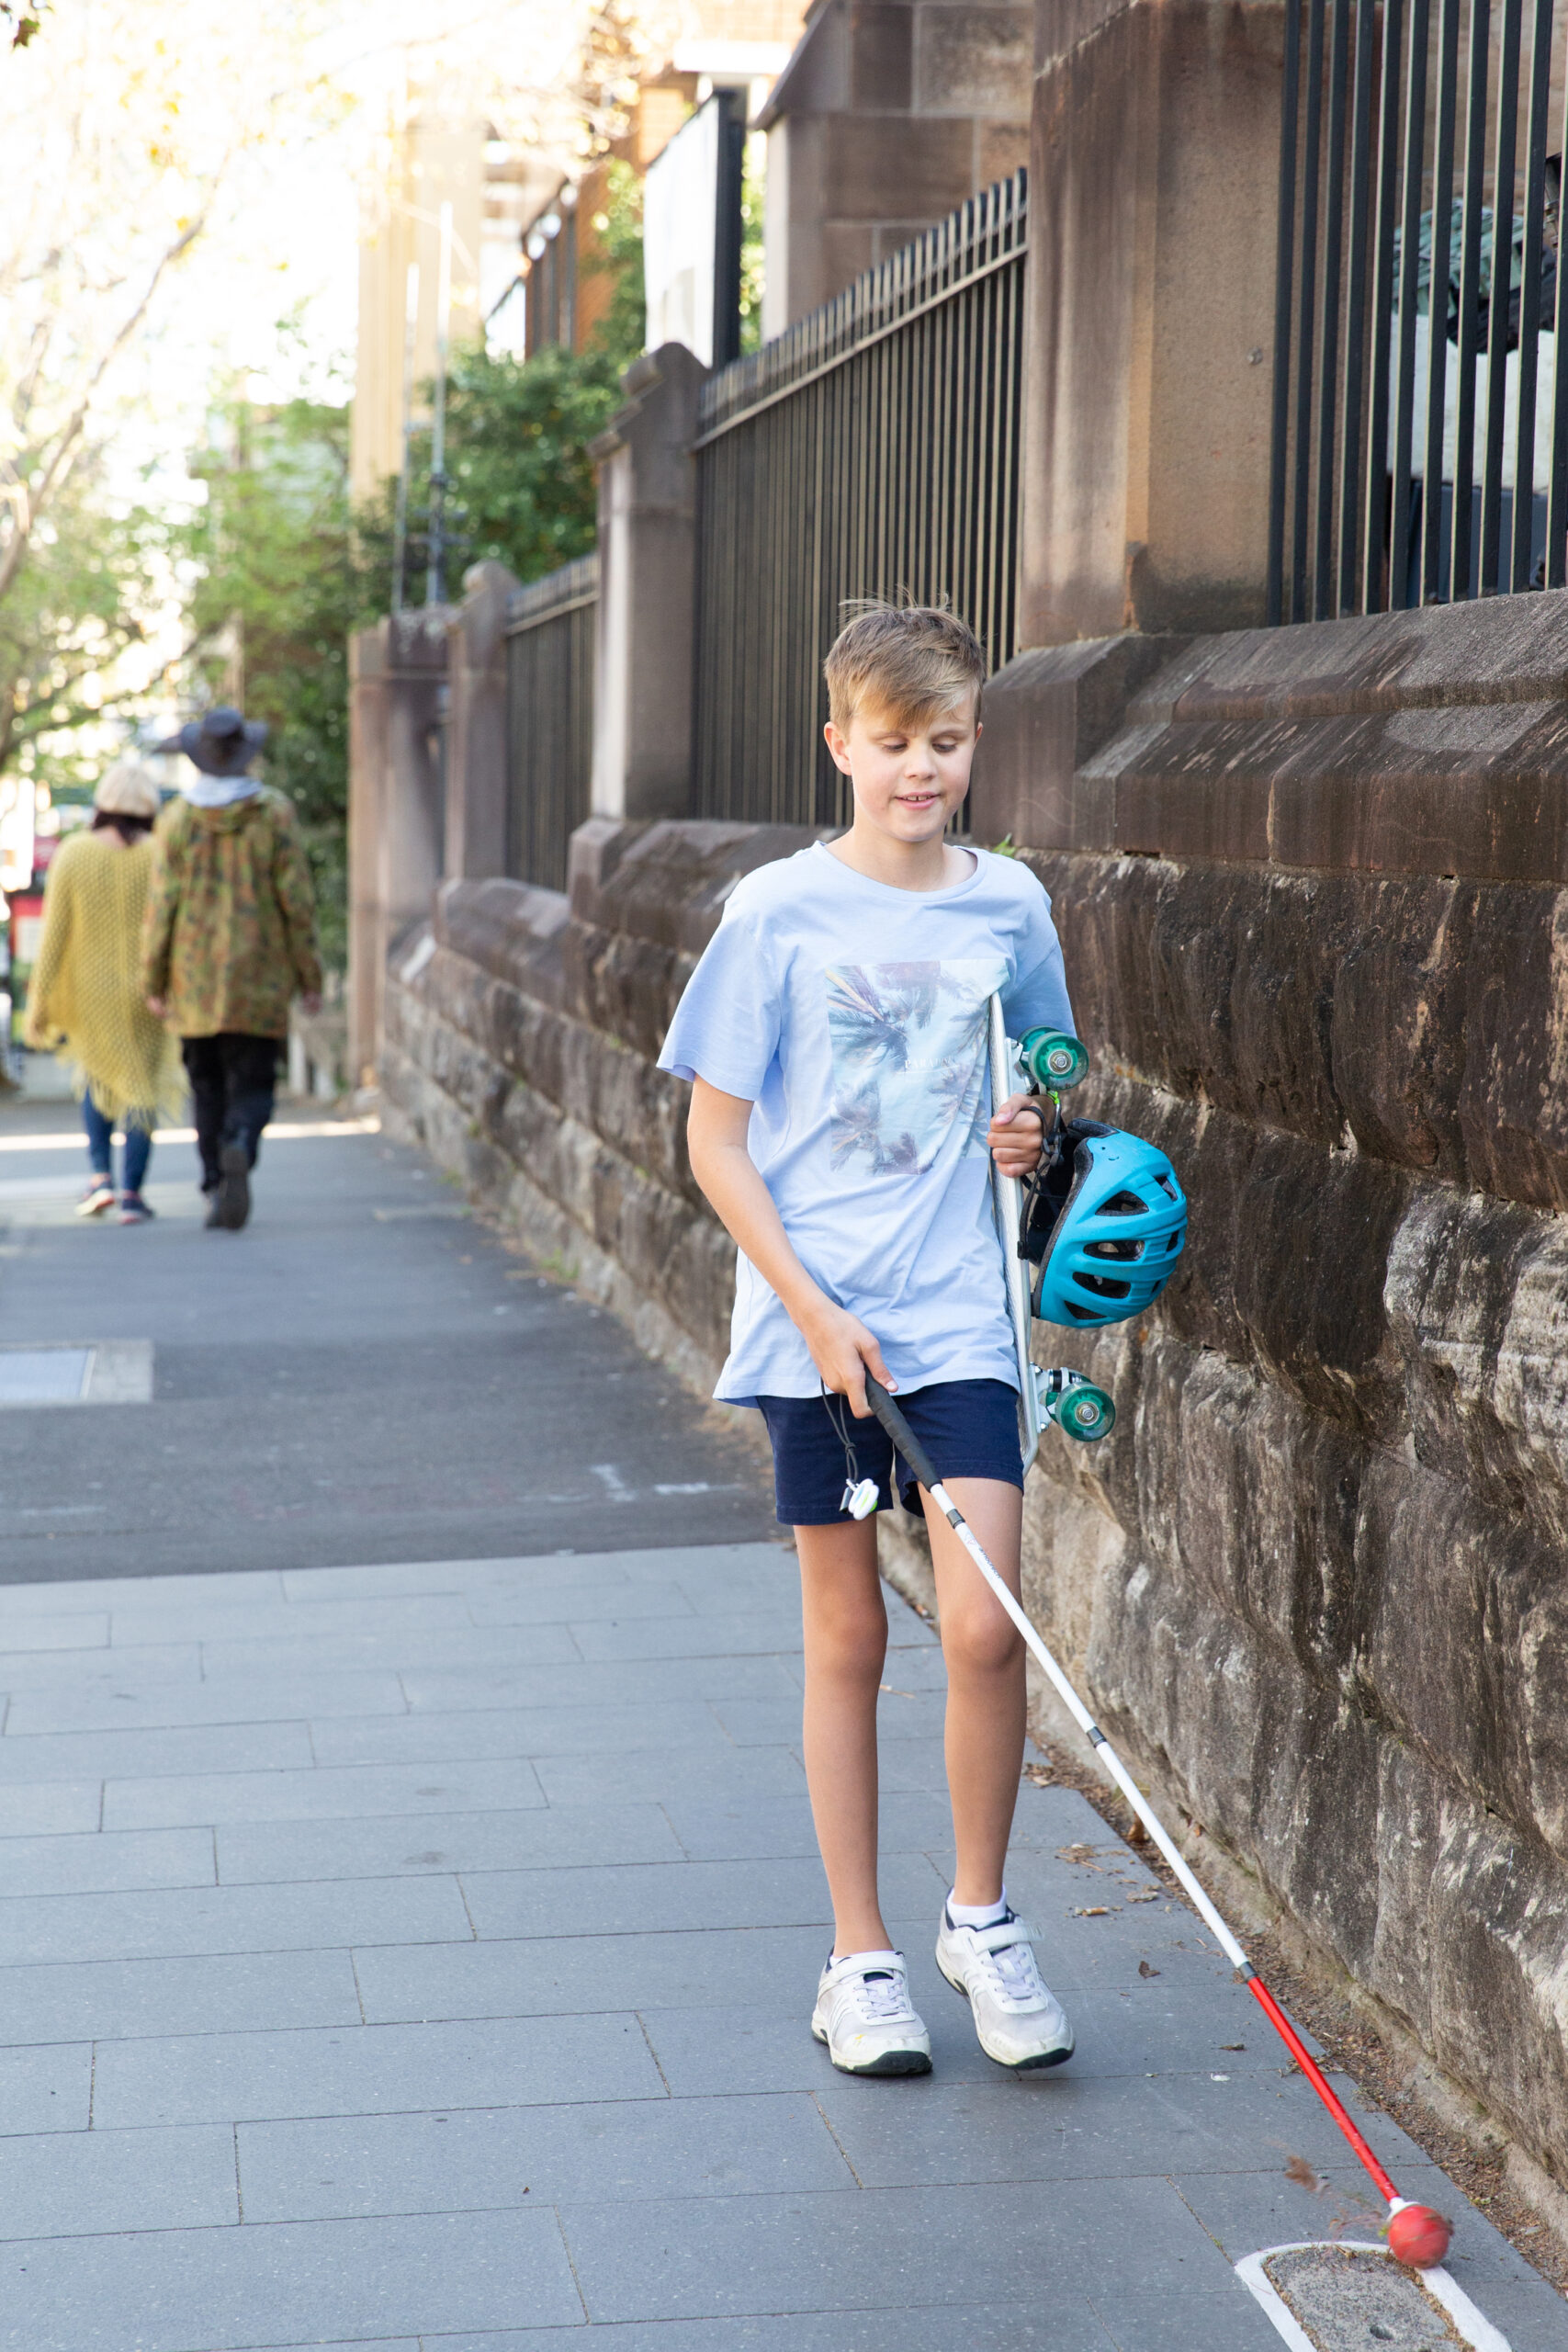 A boy walking with his white cane